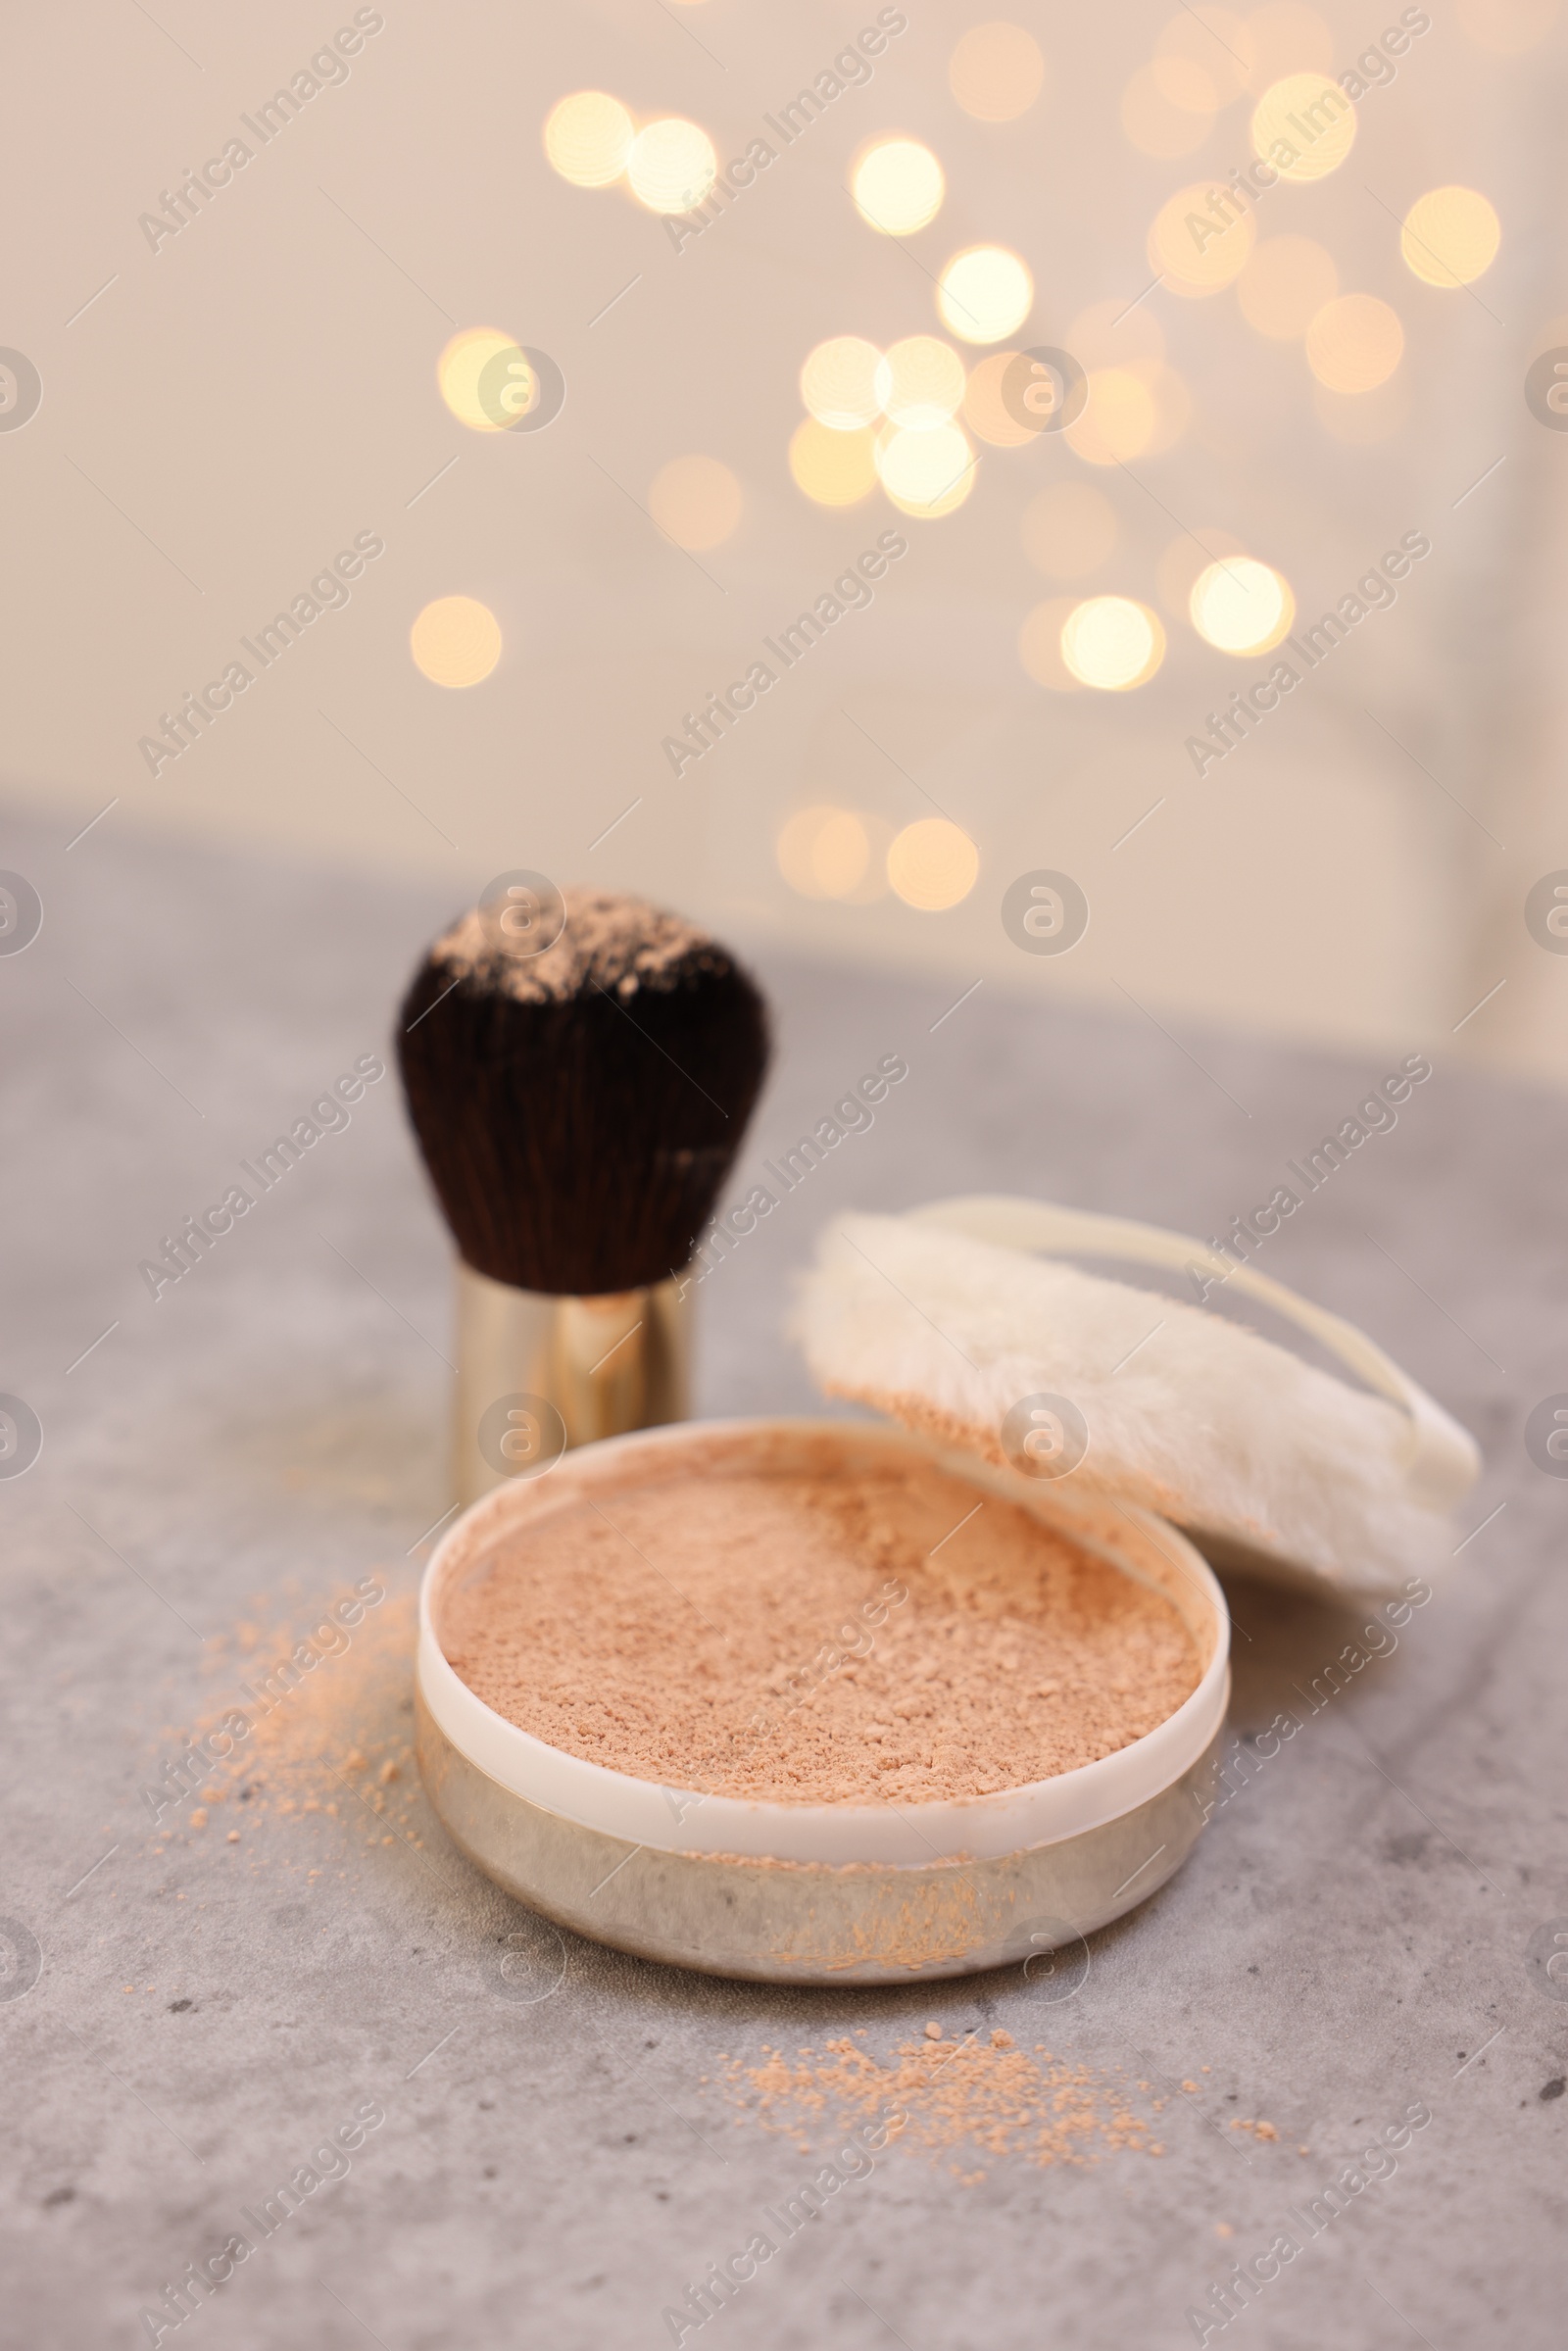 Photo of Face powder and brush on grey textured table against blurred lights